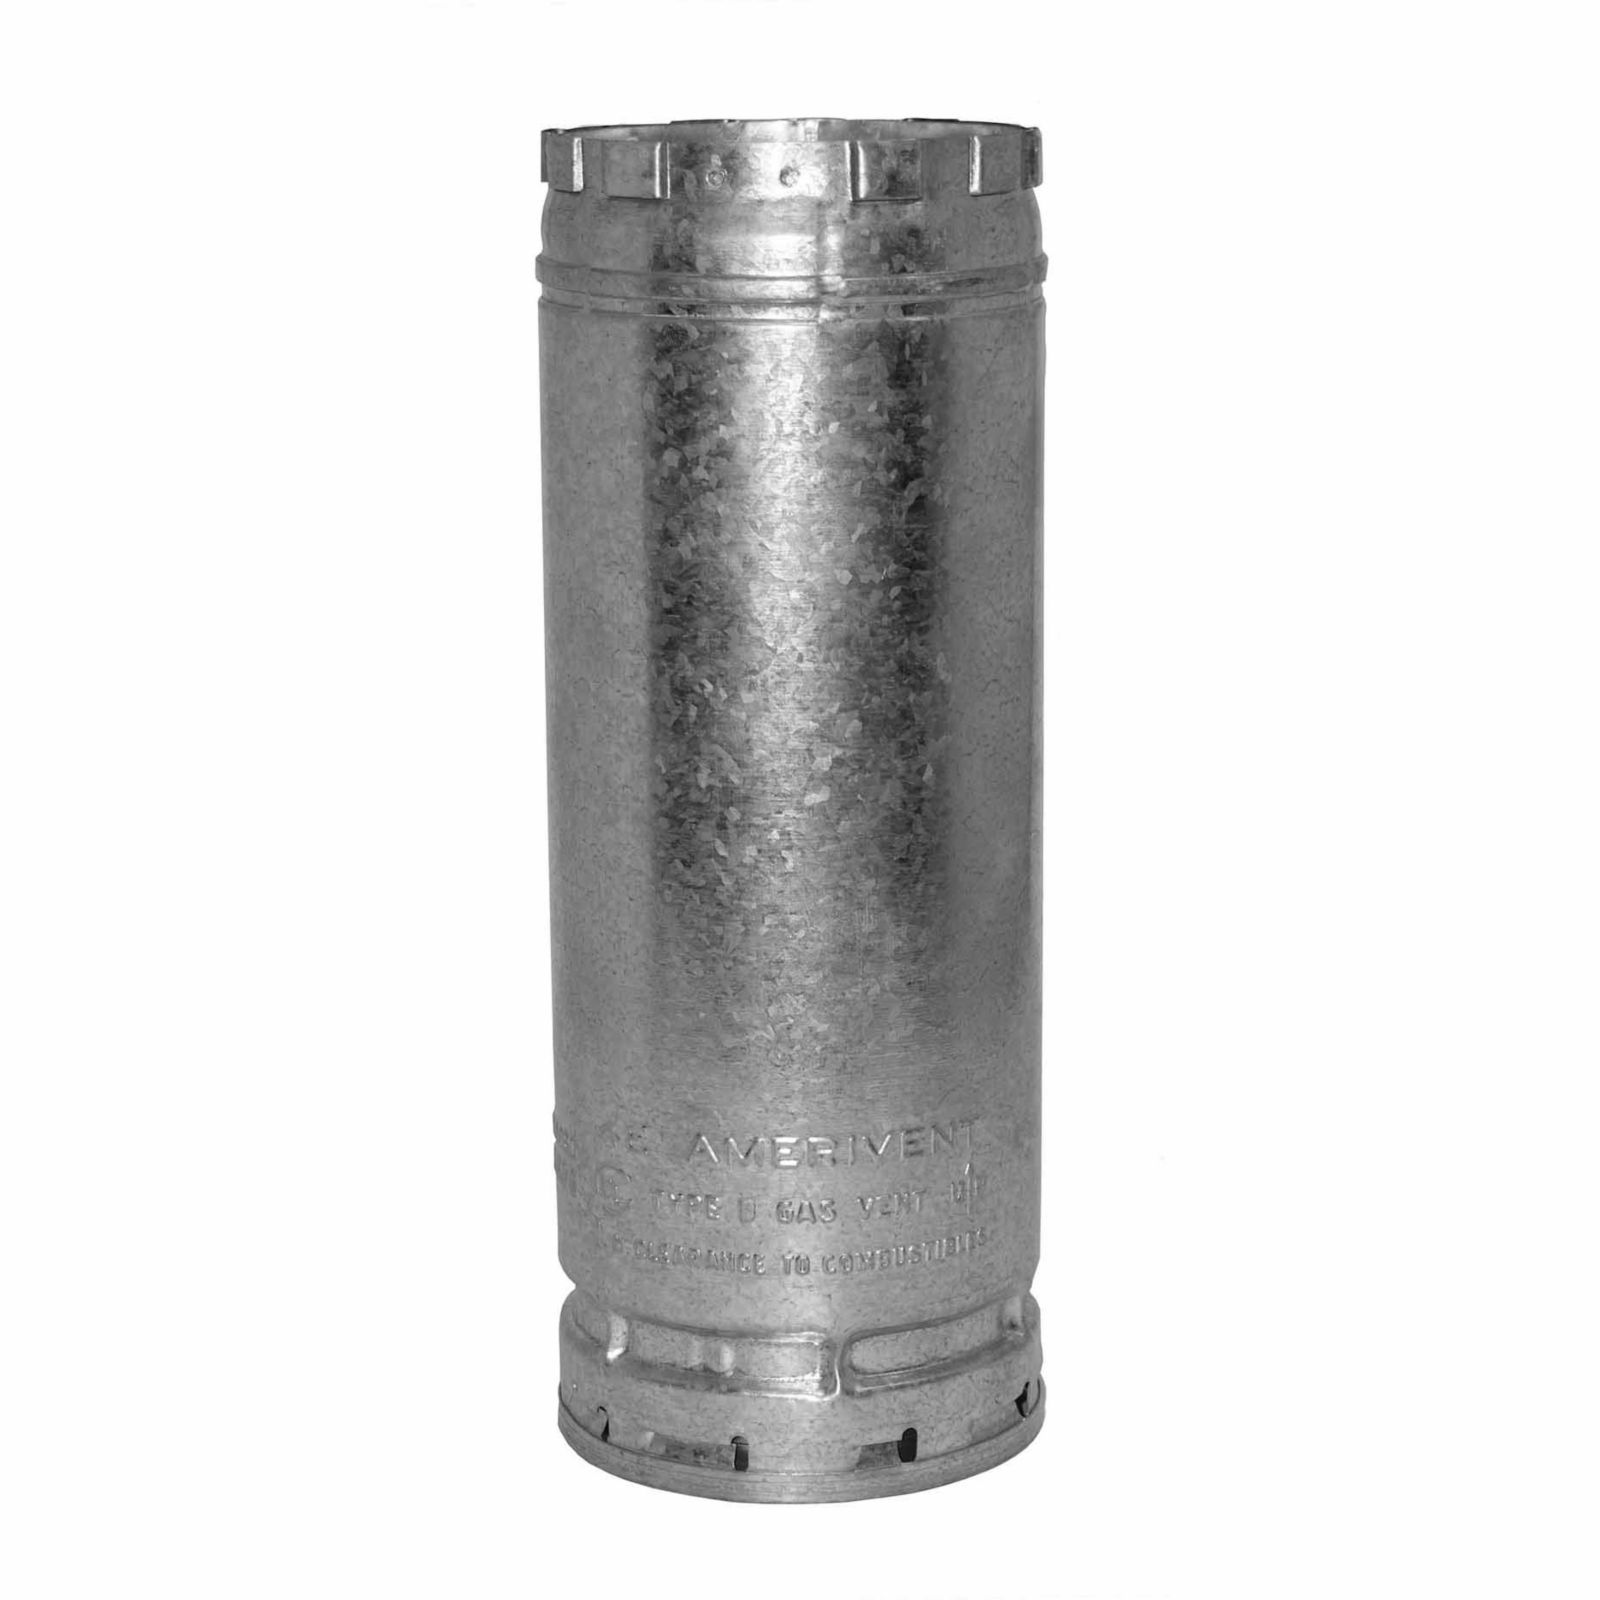 AmeriVent 6E6 - Pipe Section Type B Gas Vent, 6" Round X 6" Length